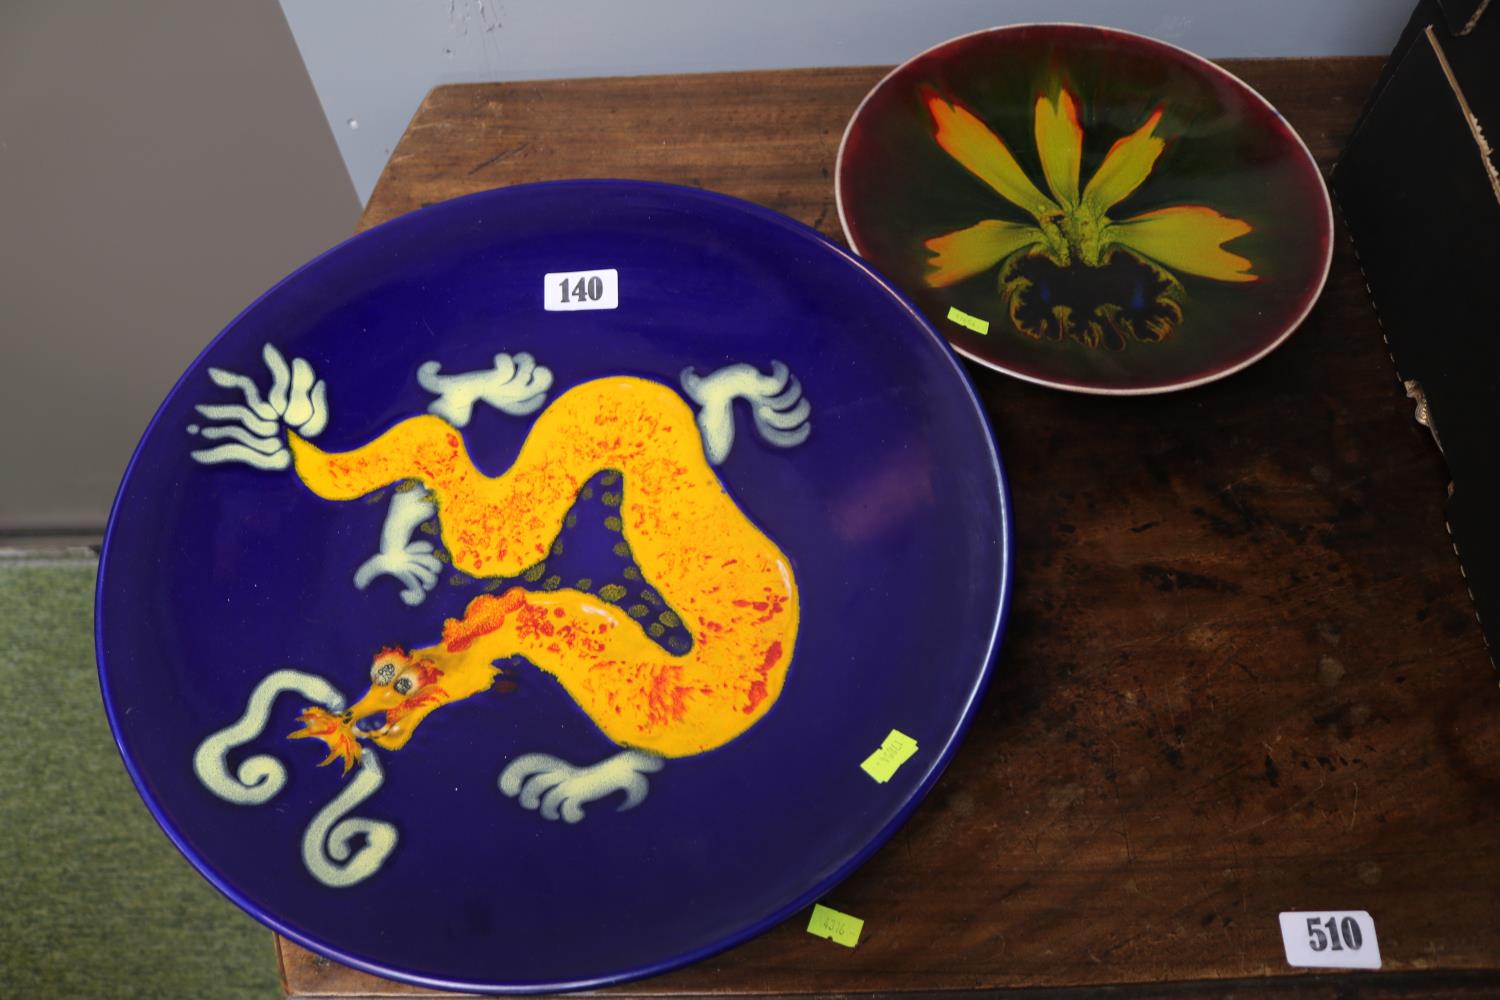 Rare Poole Charger depicting five toe dragon 1 of 1. 41cm in Diameter and a Pool bowl with Orchid